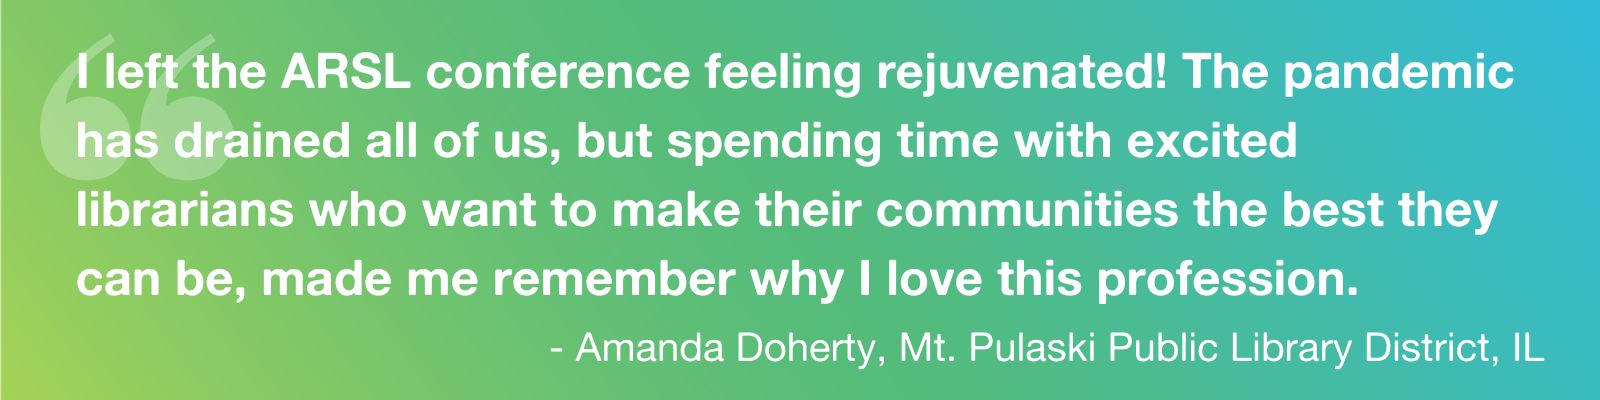 Quote: "I left the ARSL conference feeling rejuvenated! The pandemic has drained all of us, but spending time with excited librarians who want to make their communities the best they can be, made me remember why I love this profession." - - Amanda Doherty, Mt. Pulaski Public Library District, IL